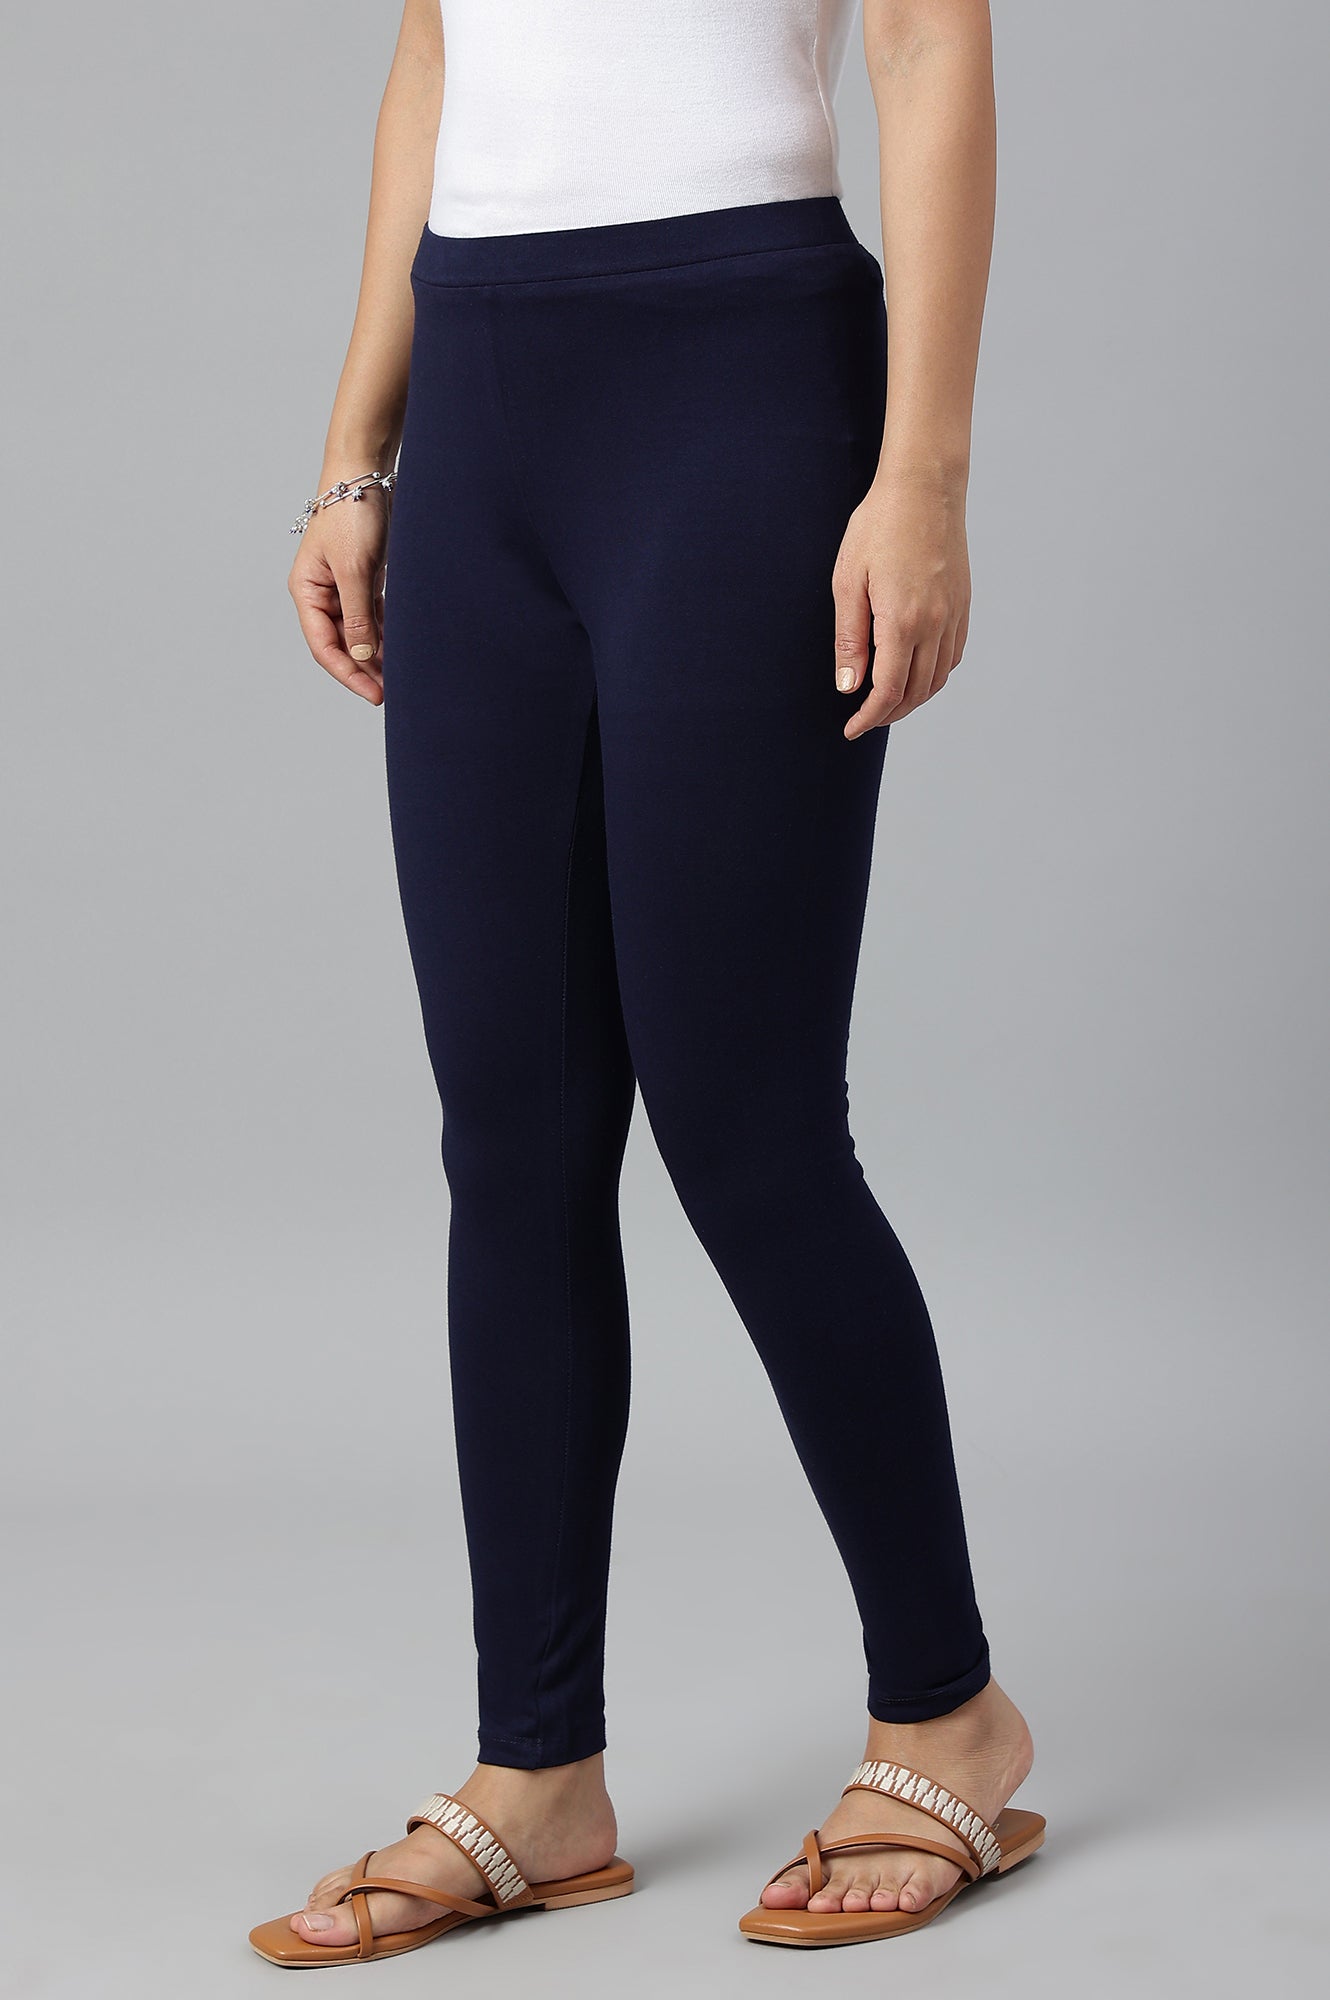 Navy Blue Solid Knitted Women Tights